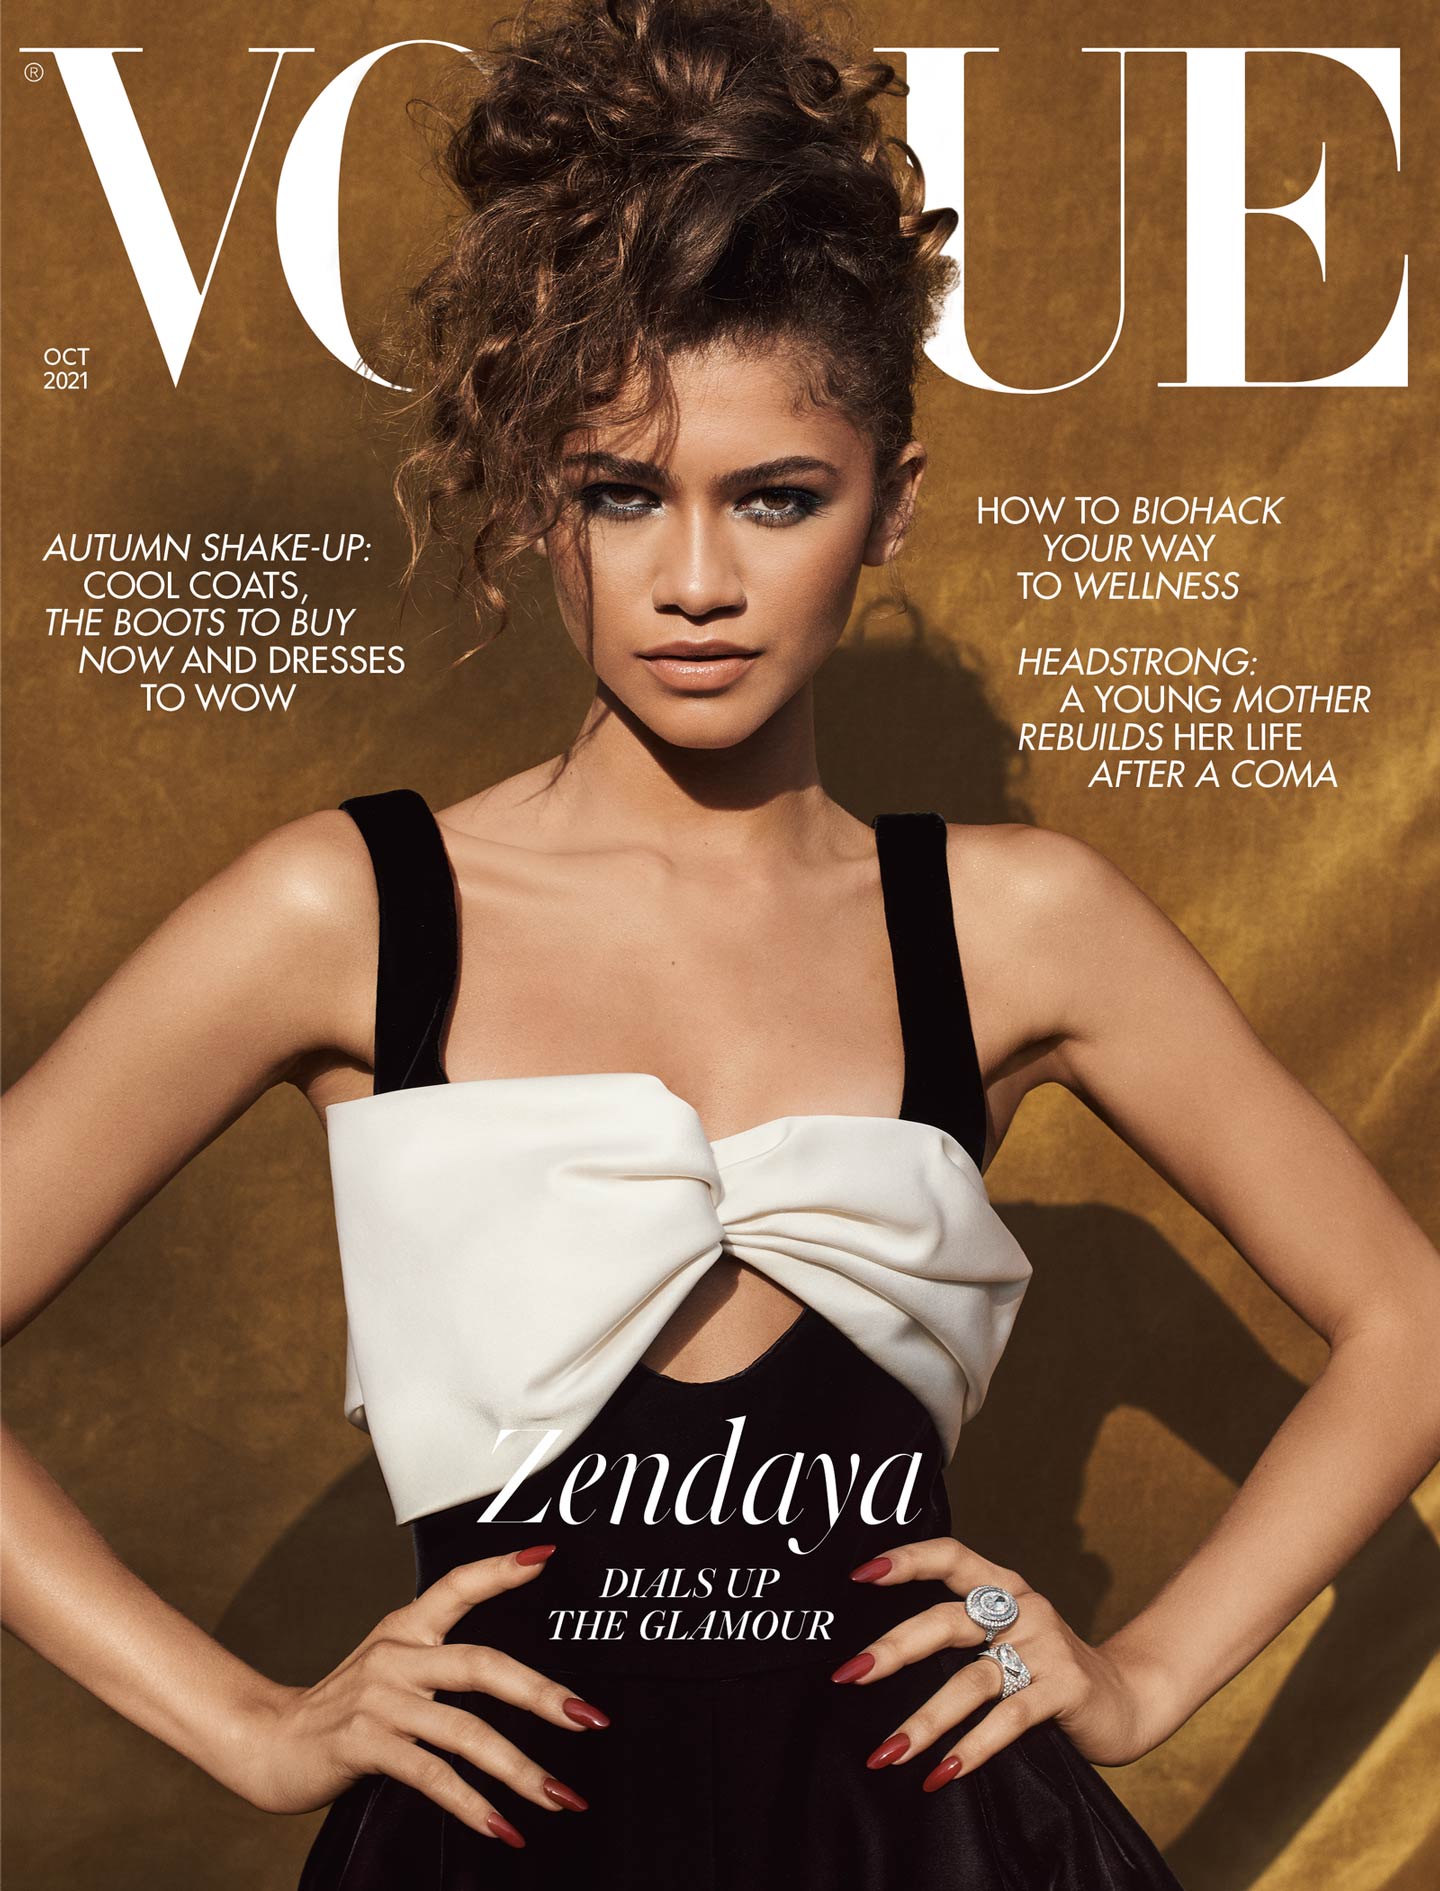 Cover for British Vogue's October 2021 issue, featuring Zendaya cover story.